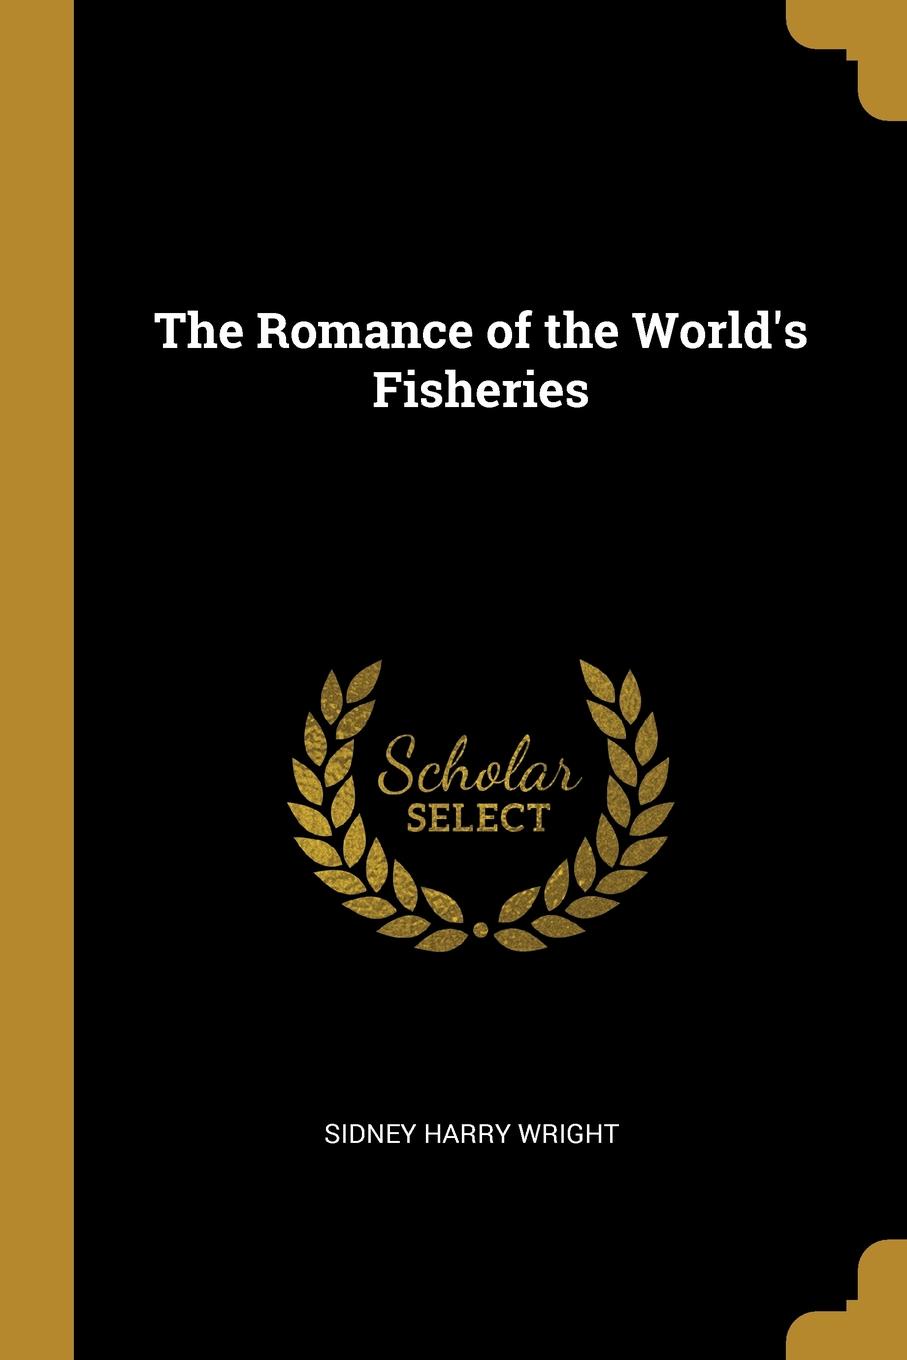 The Romance of the World.s Fisheries